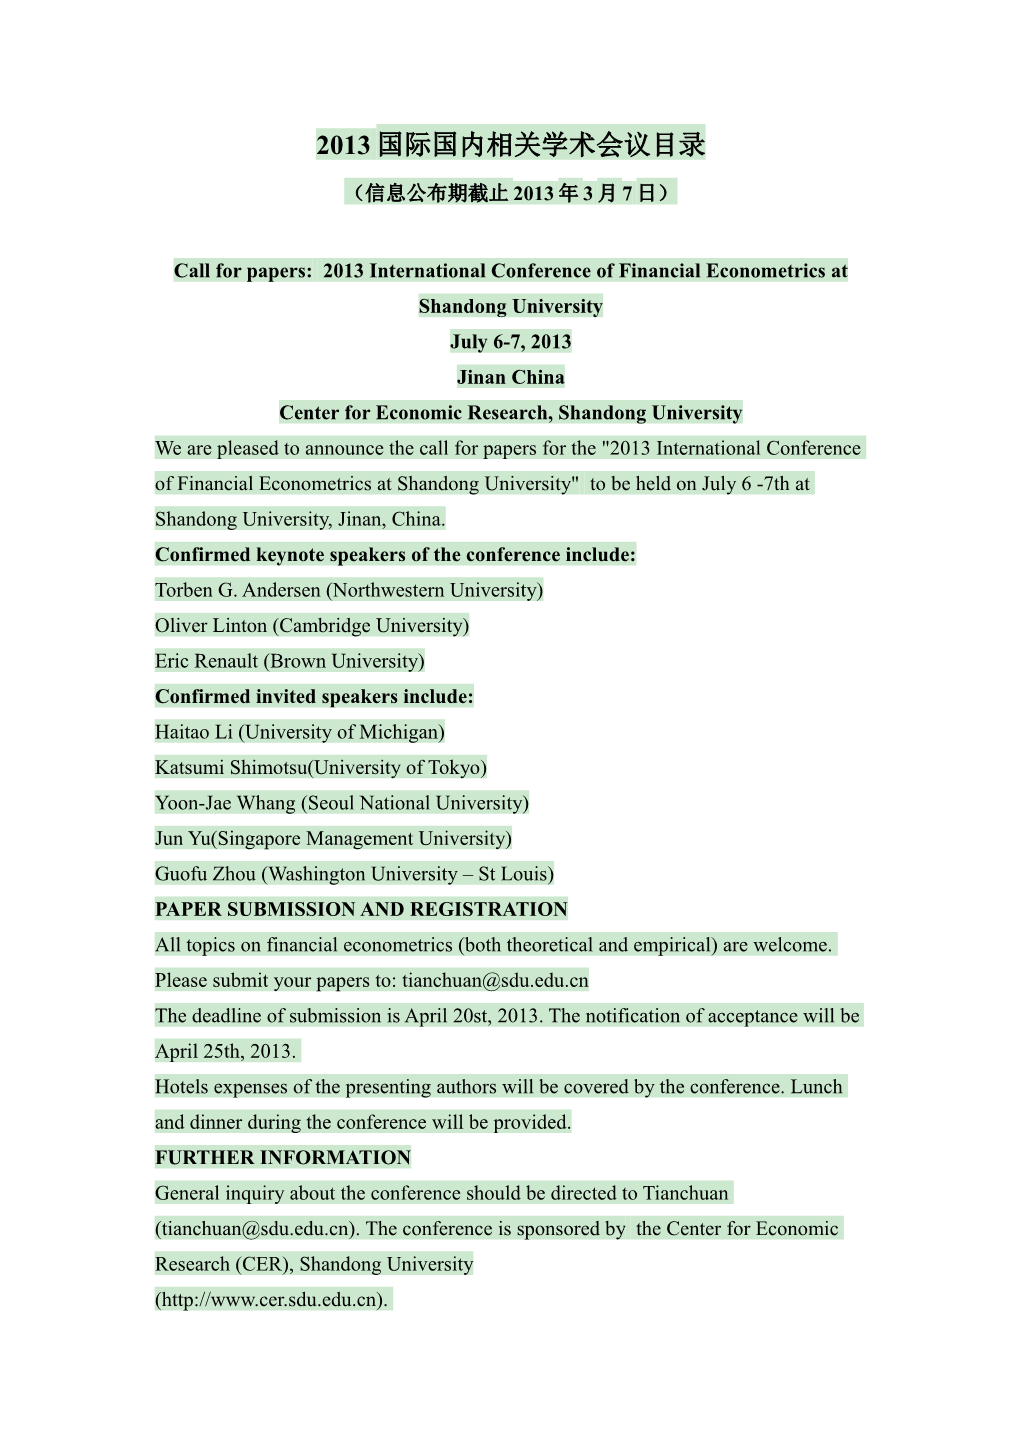 Call for Papers: 2013 International Conference of Financial Econometrics at Shandonguniversity